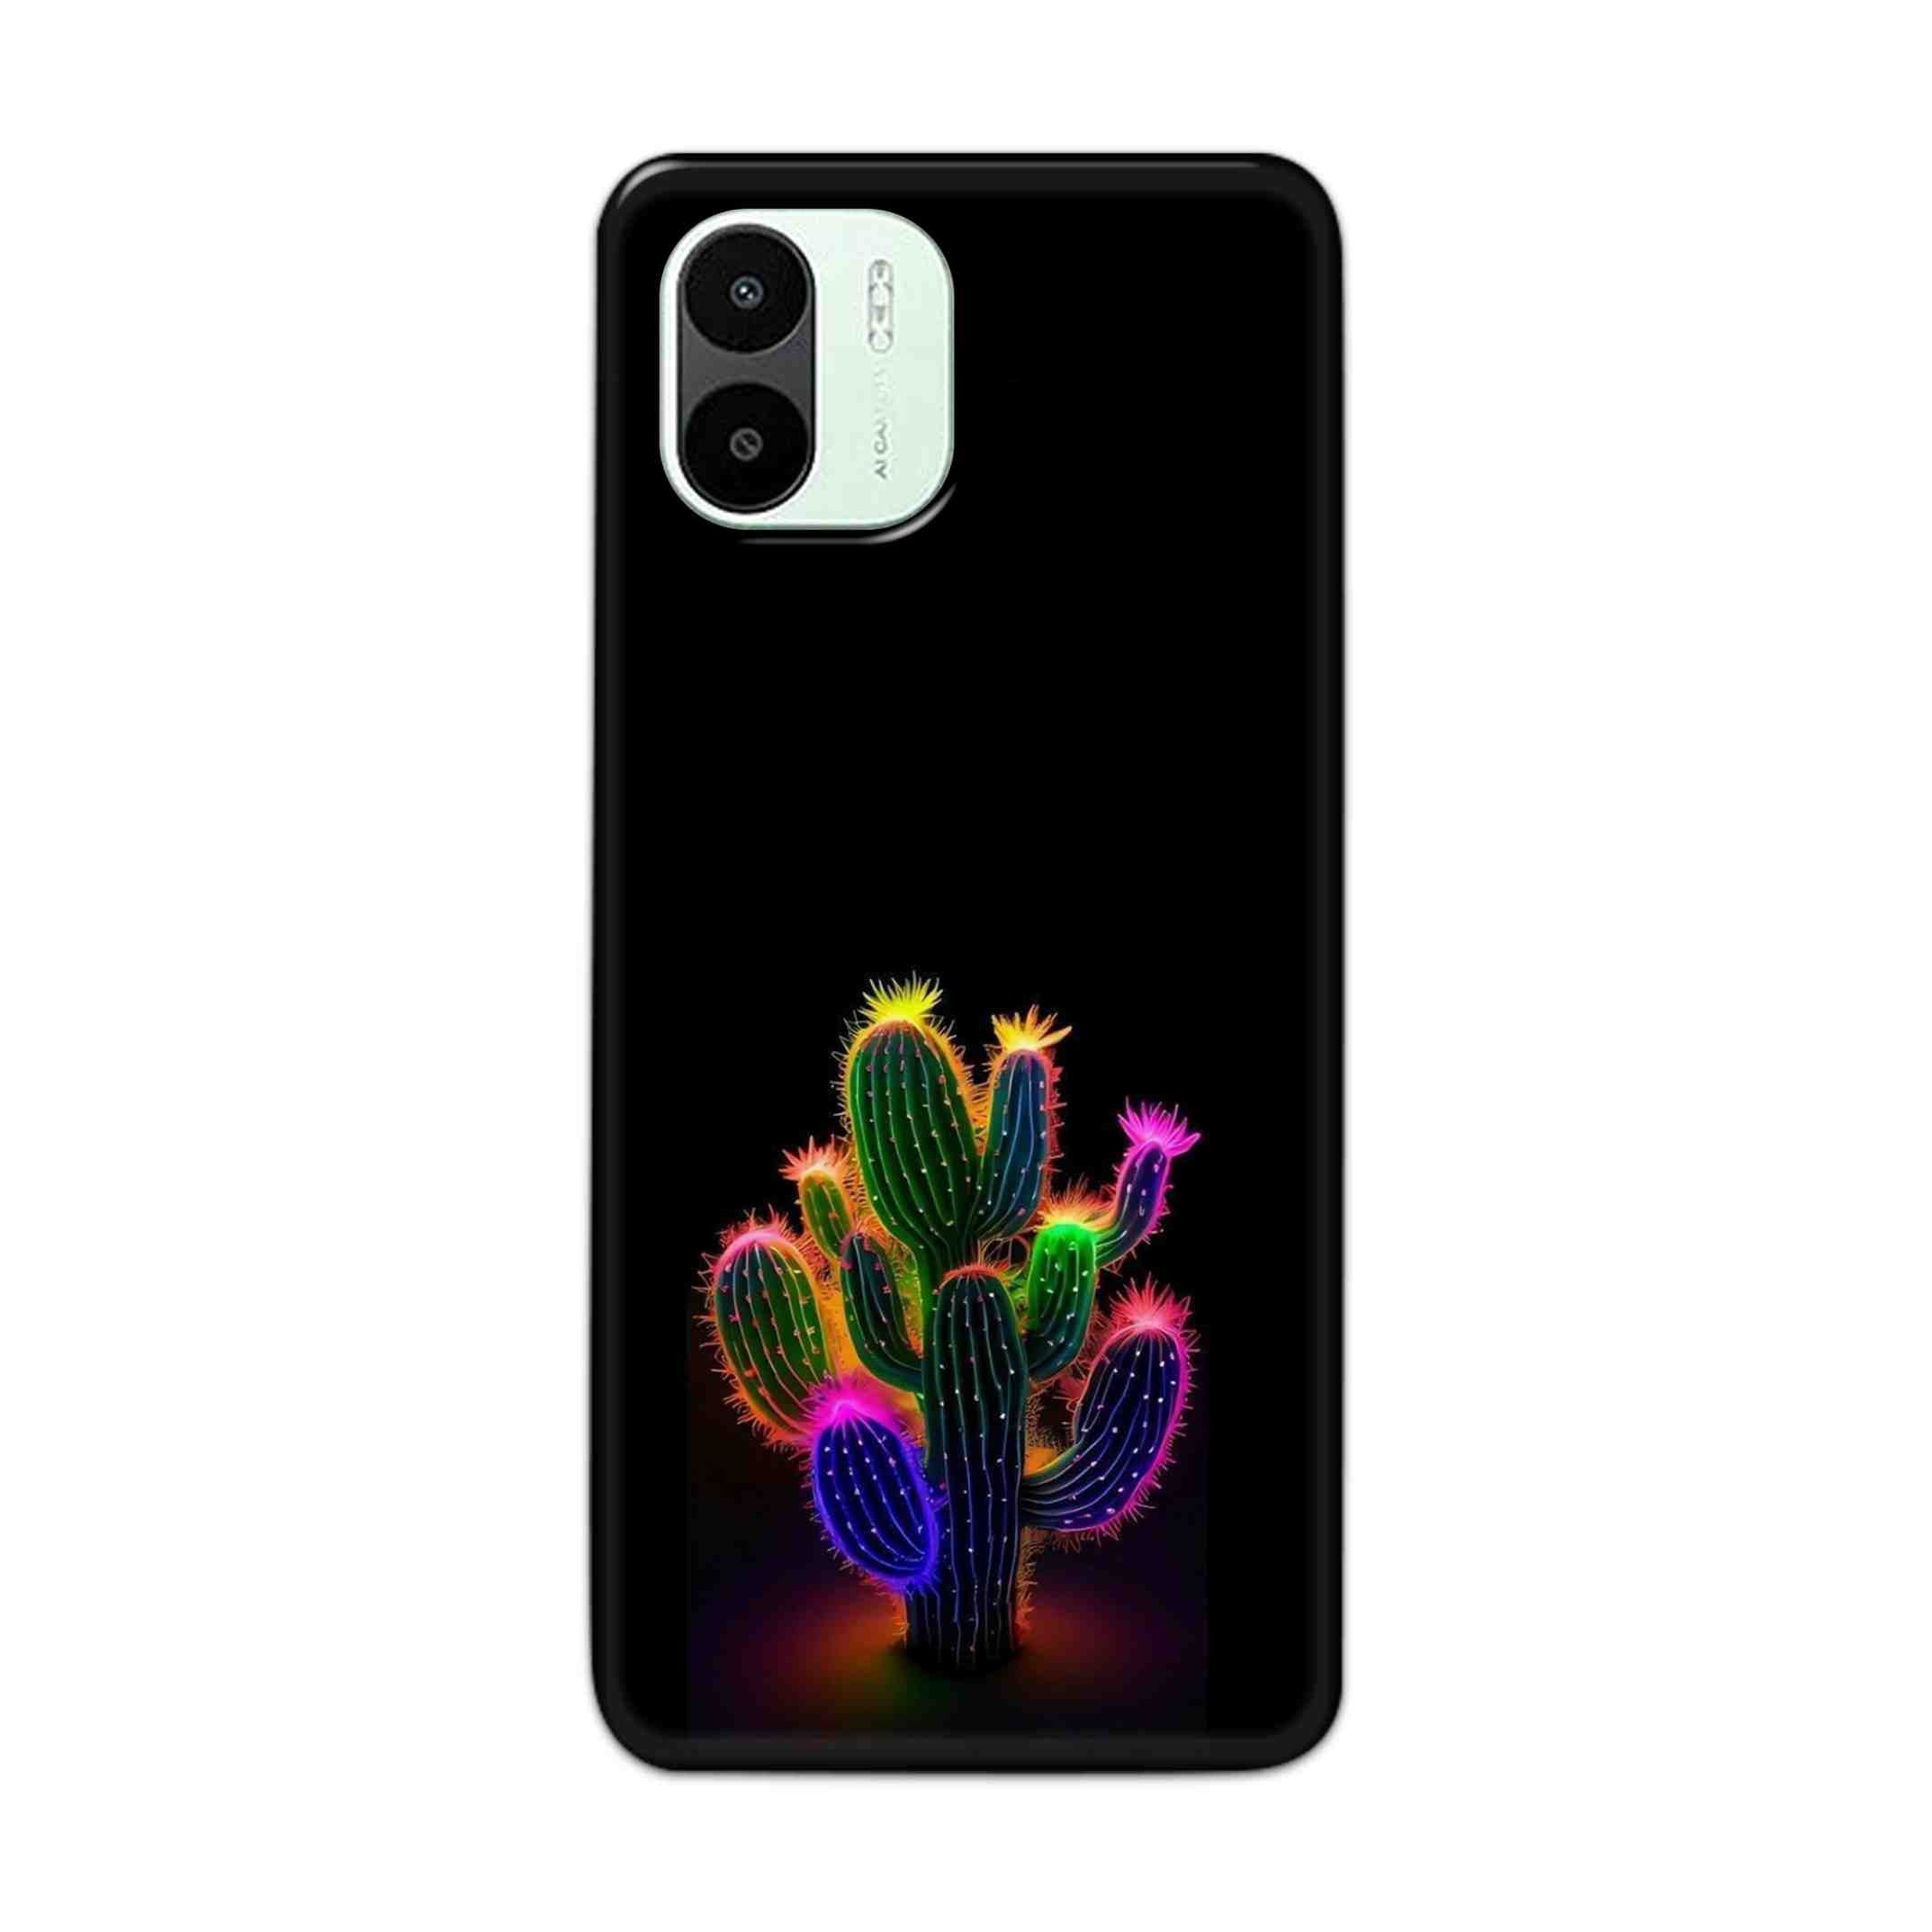 Buy Neon Flower Hard Back Mobile Phone Case Cover For Xiaomi Redmi A1 5G Online